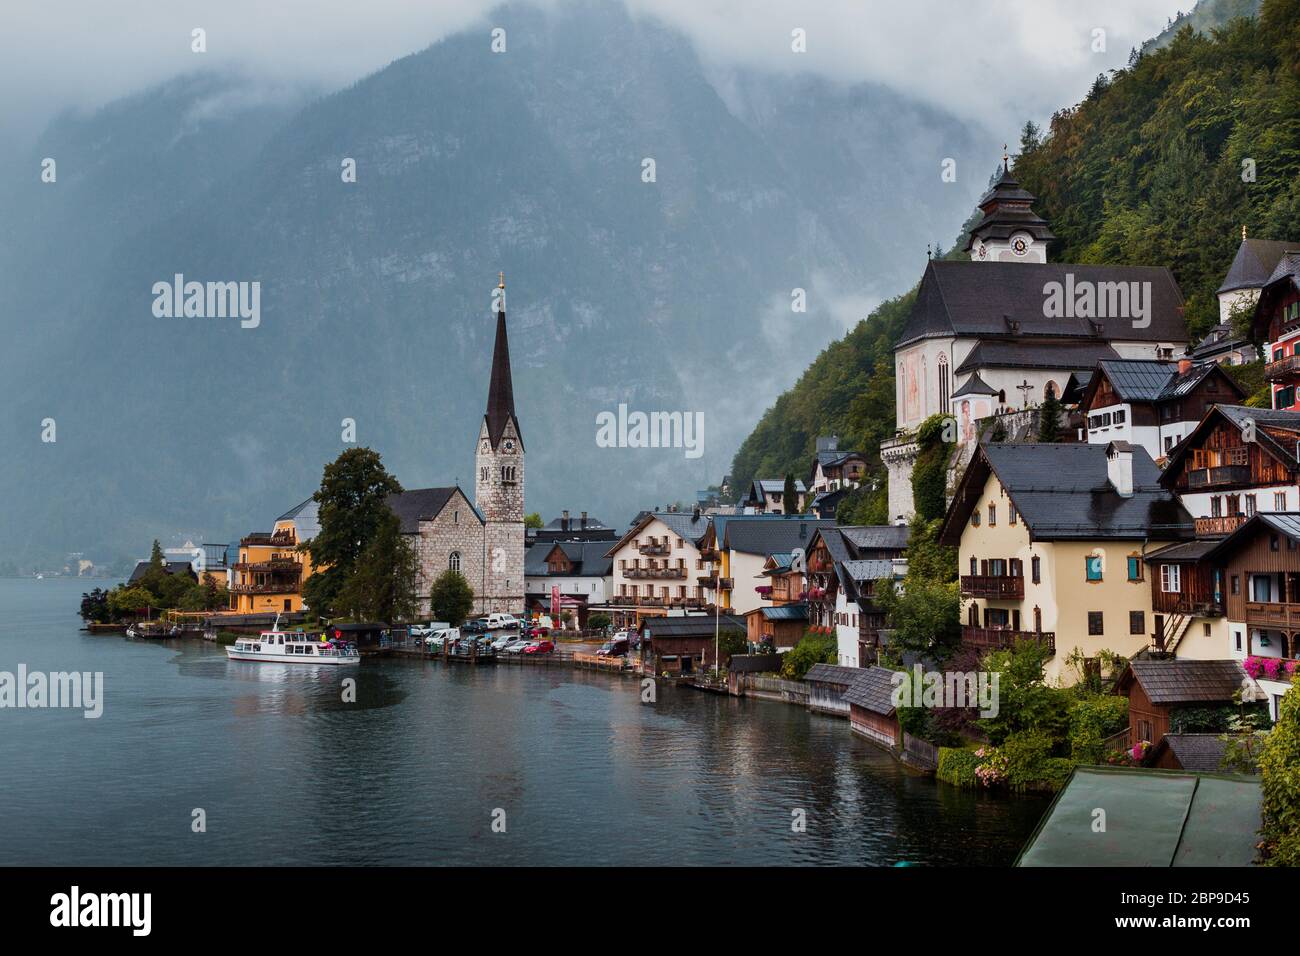 Hallstatt view in a foggy day and clouds between the mountains Stock Photo